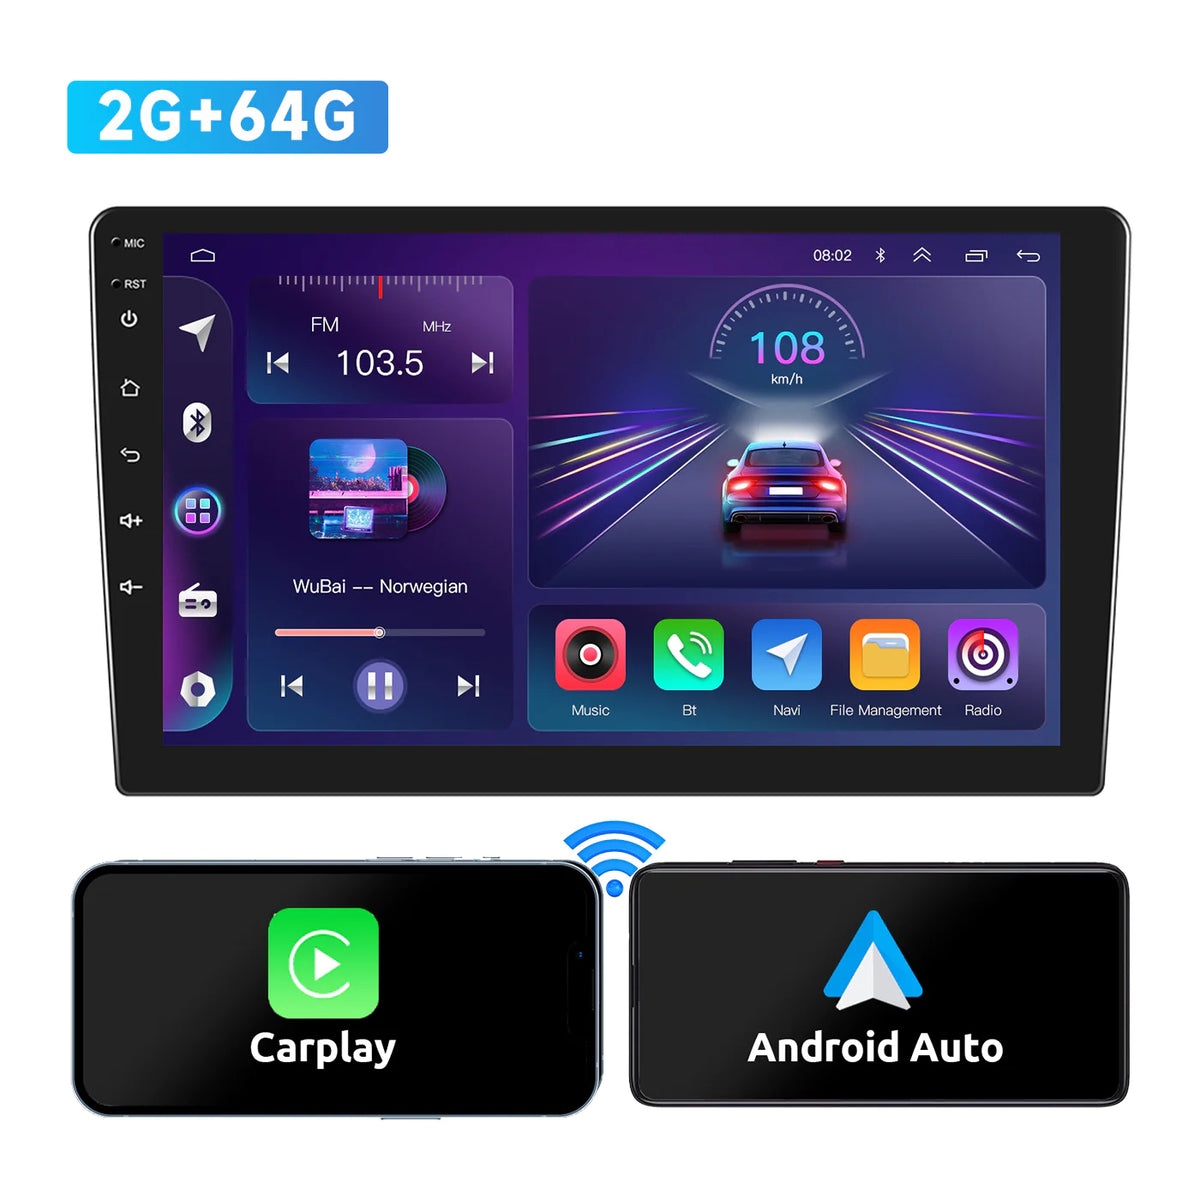 PODOFO A3019 Android In-dash GPS Stereo